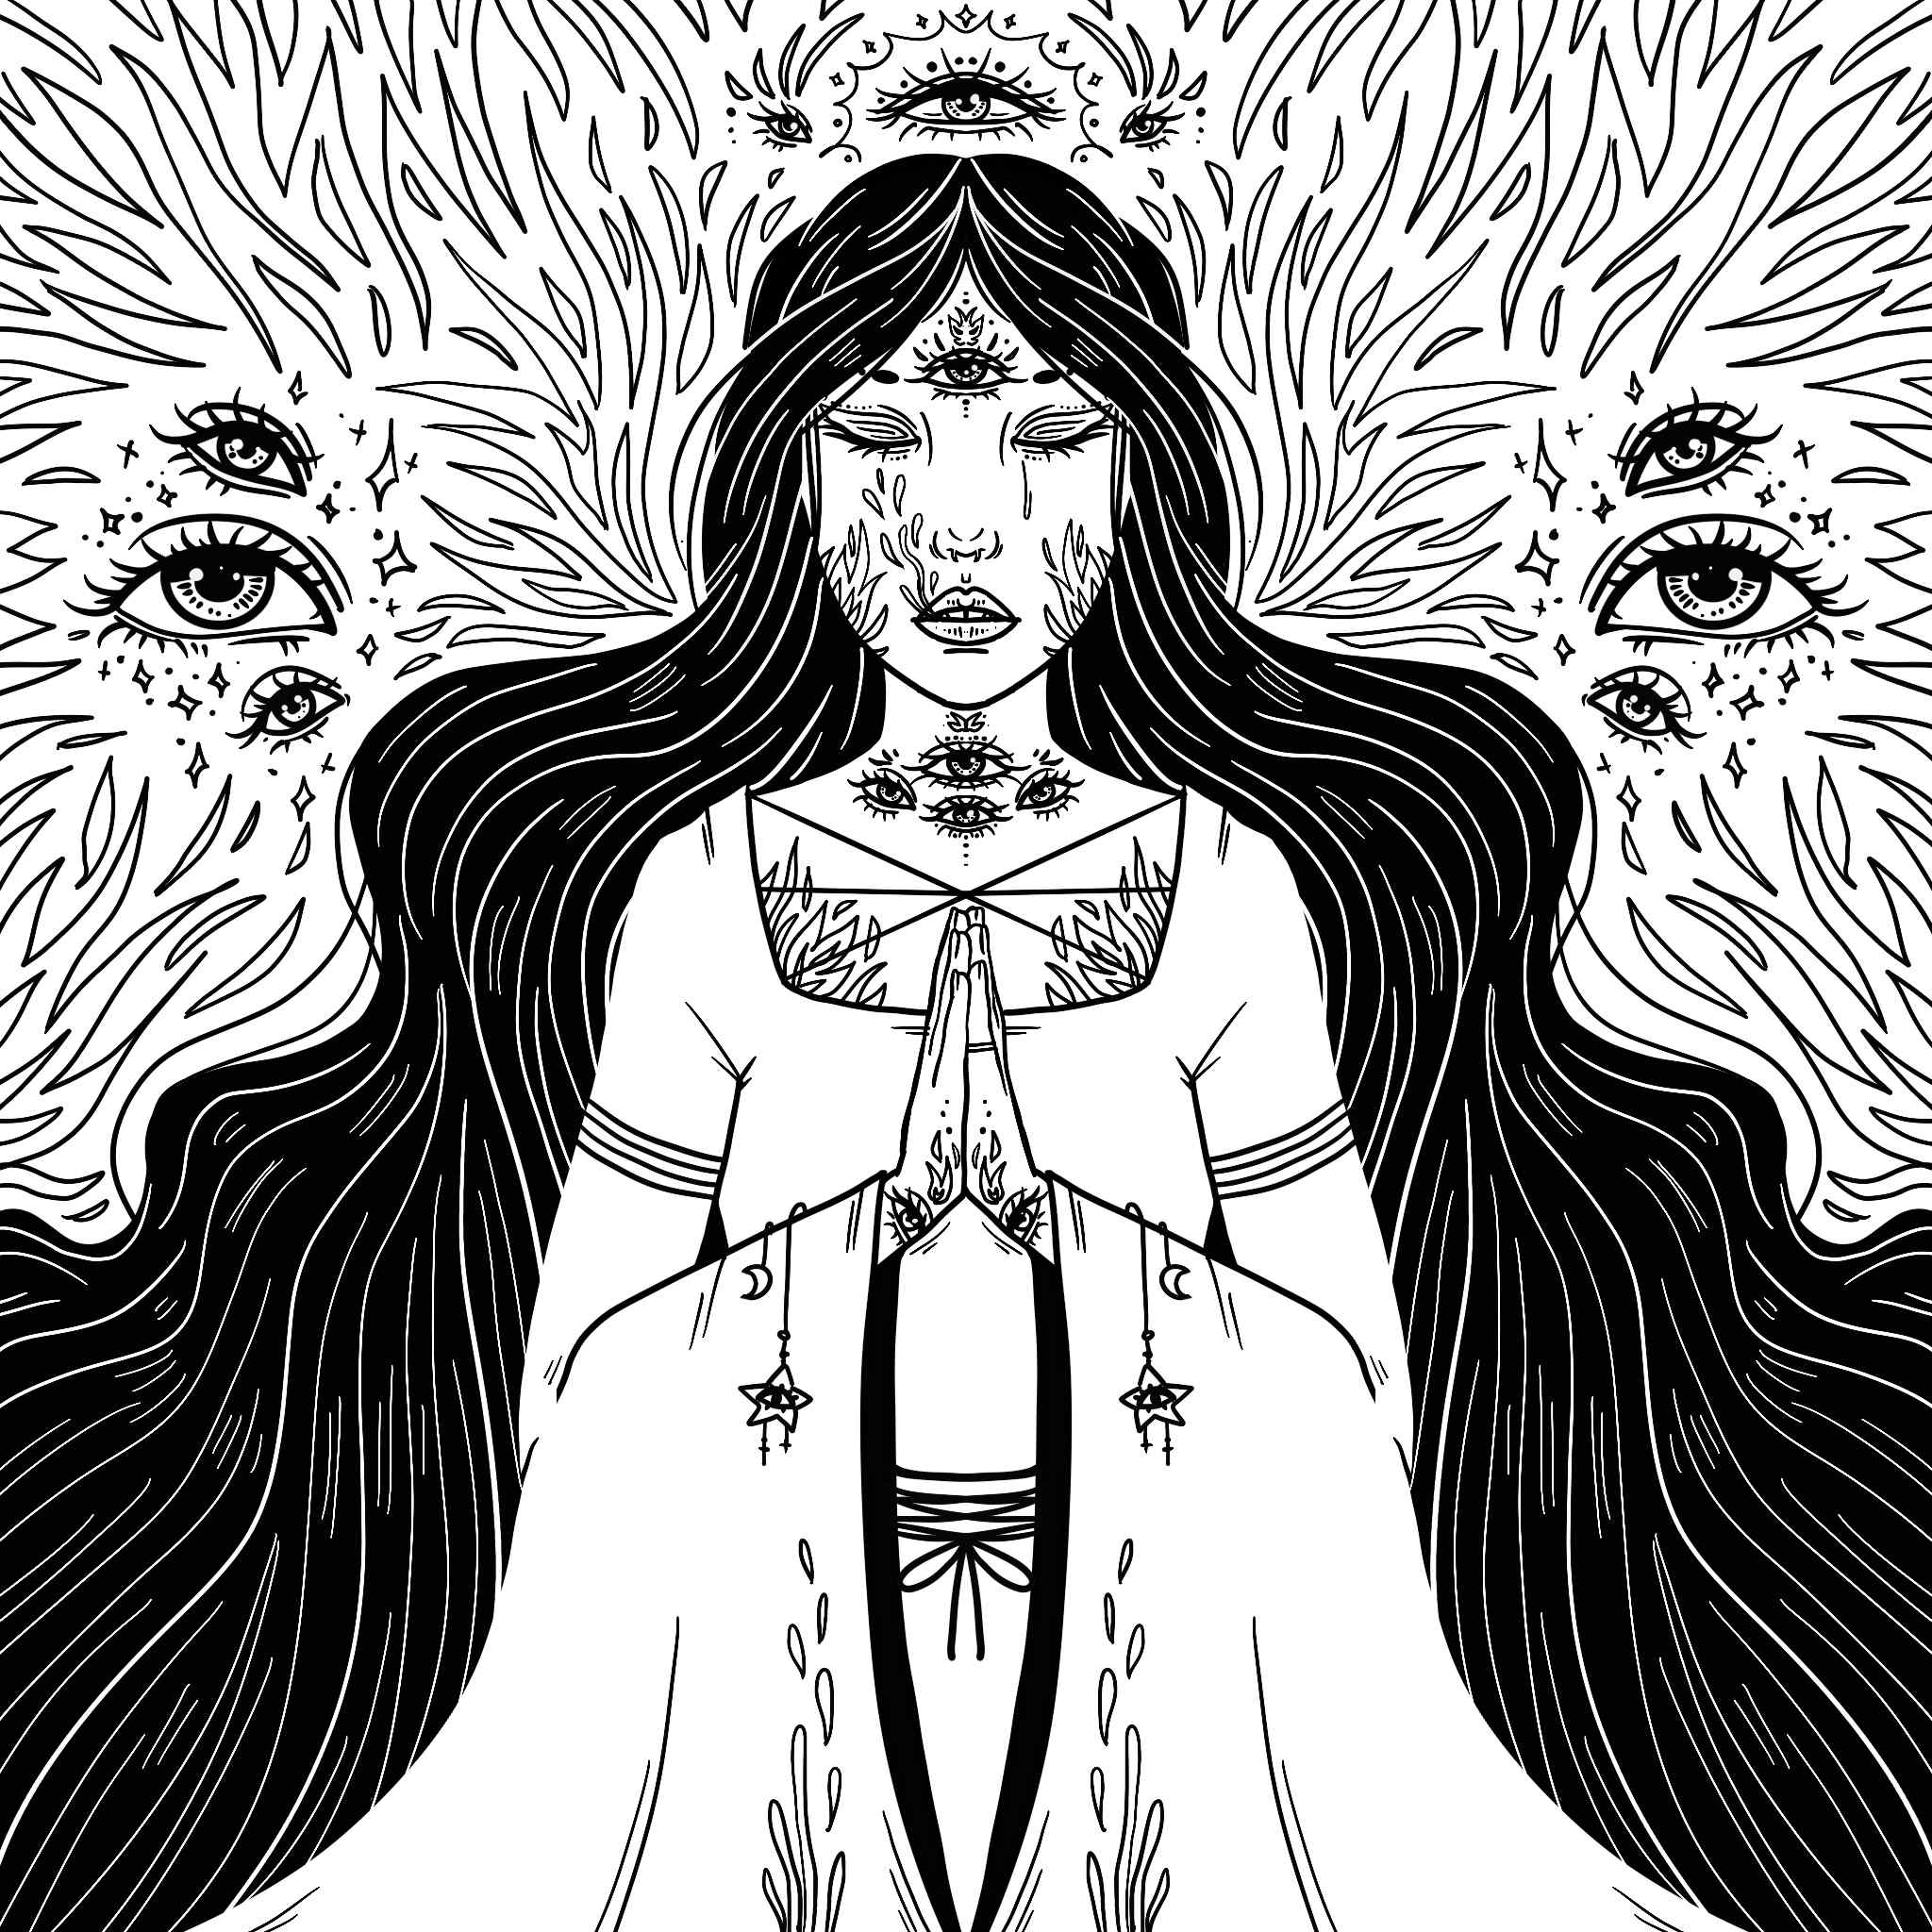 digital symmetrical ink drawing of a mystic woman with long black hair. She is praying. Eyes adorn large parts of the drawing.